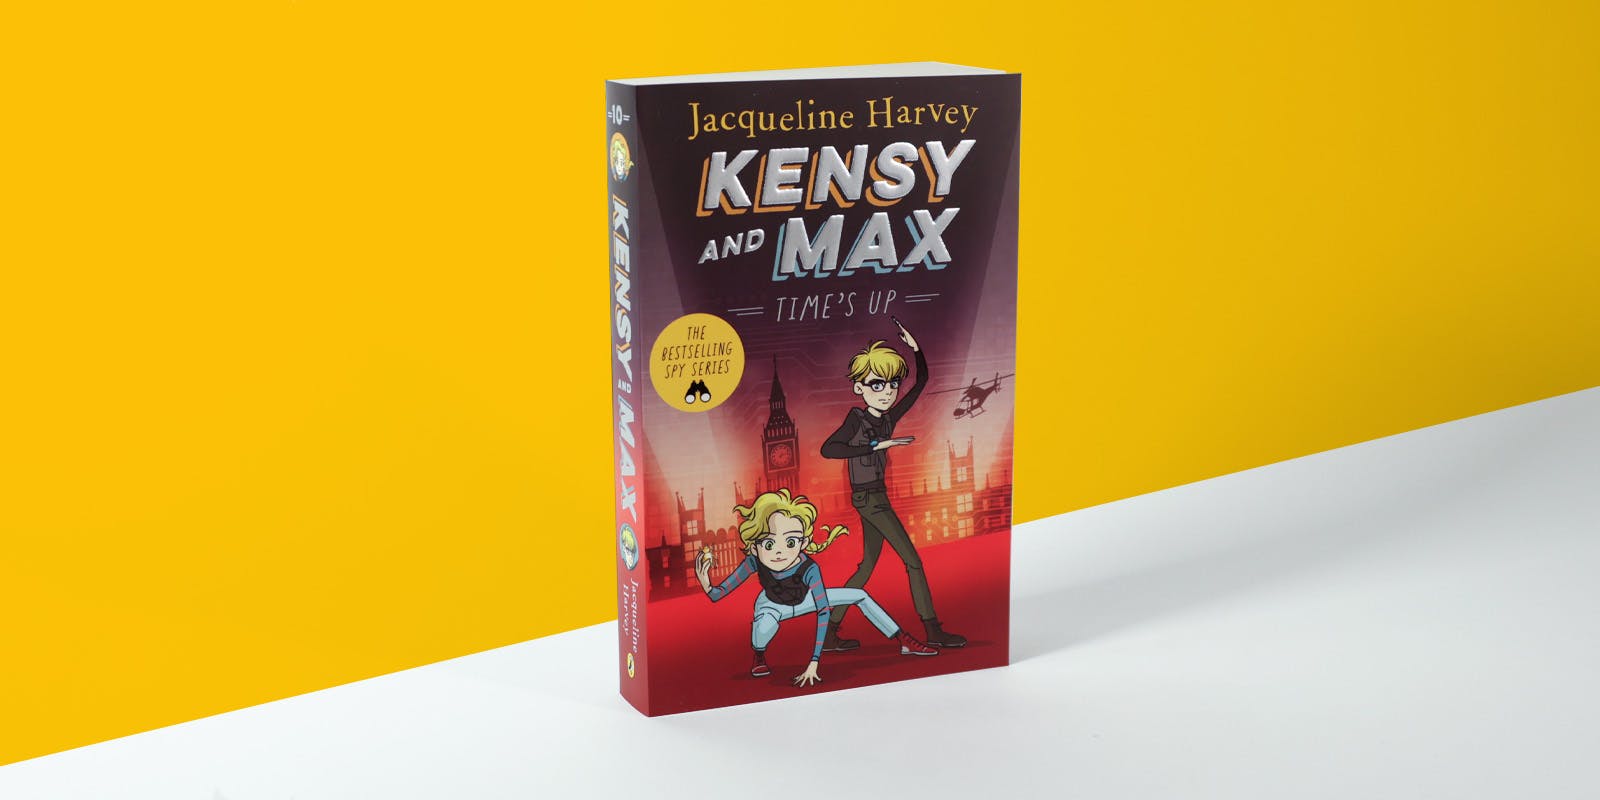 3 reasons why readers love Jacqueline Harvey’s Kensy and Max series so much